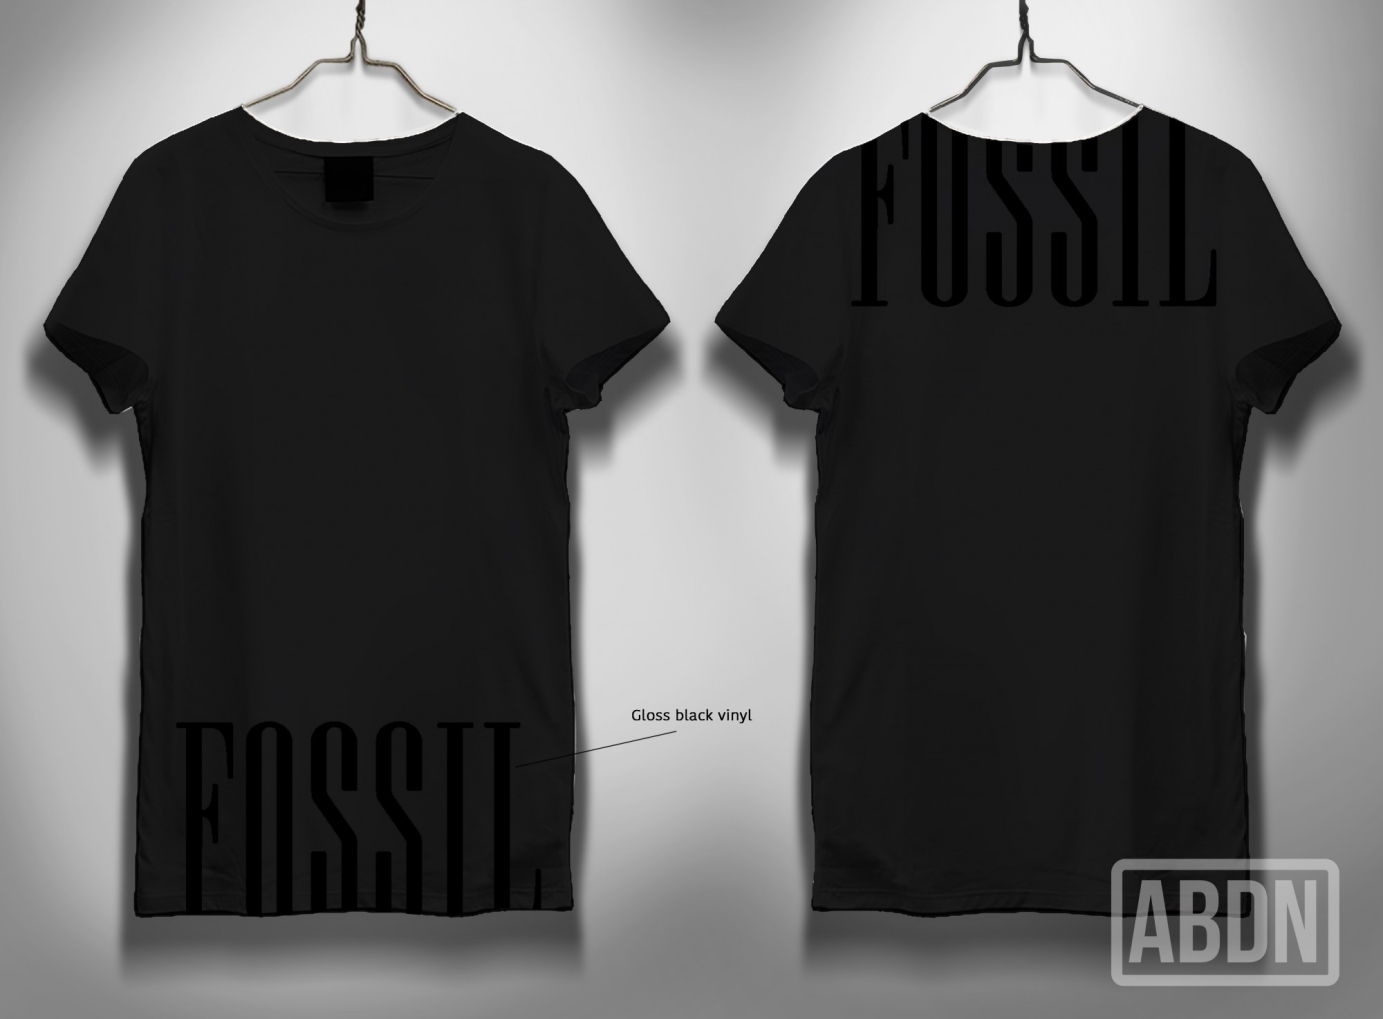 Fossil - Creative direction, Album Artwork, Poster and Merchandise designs